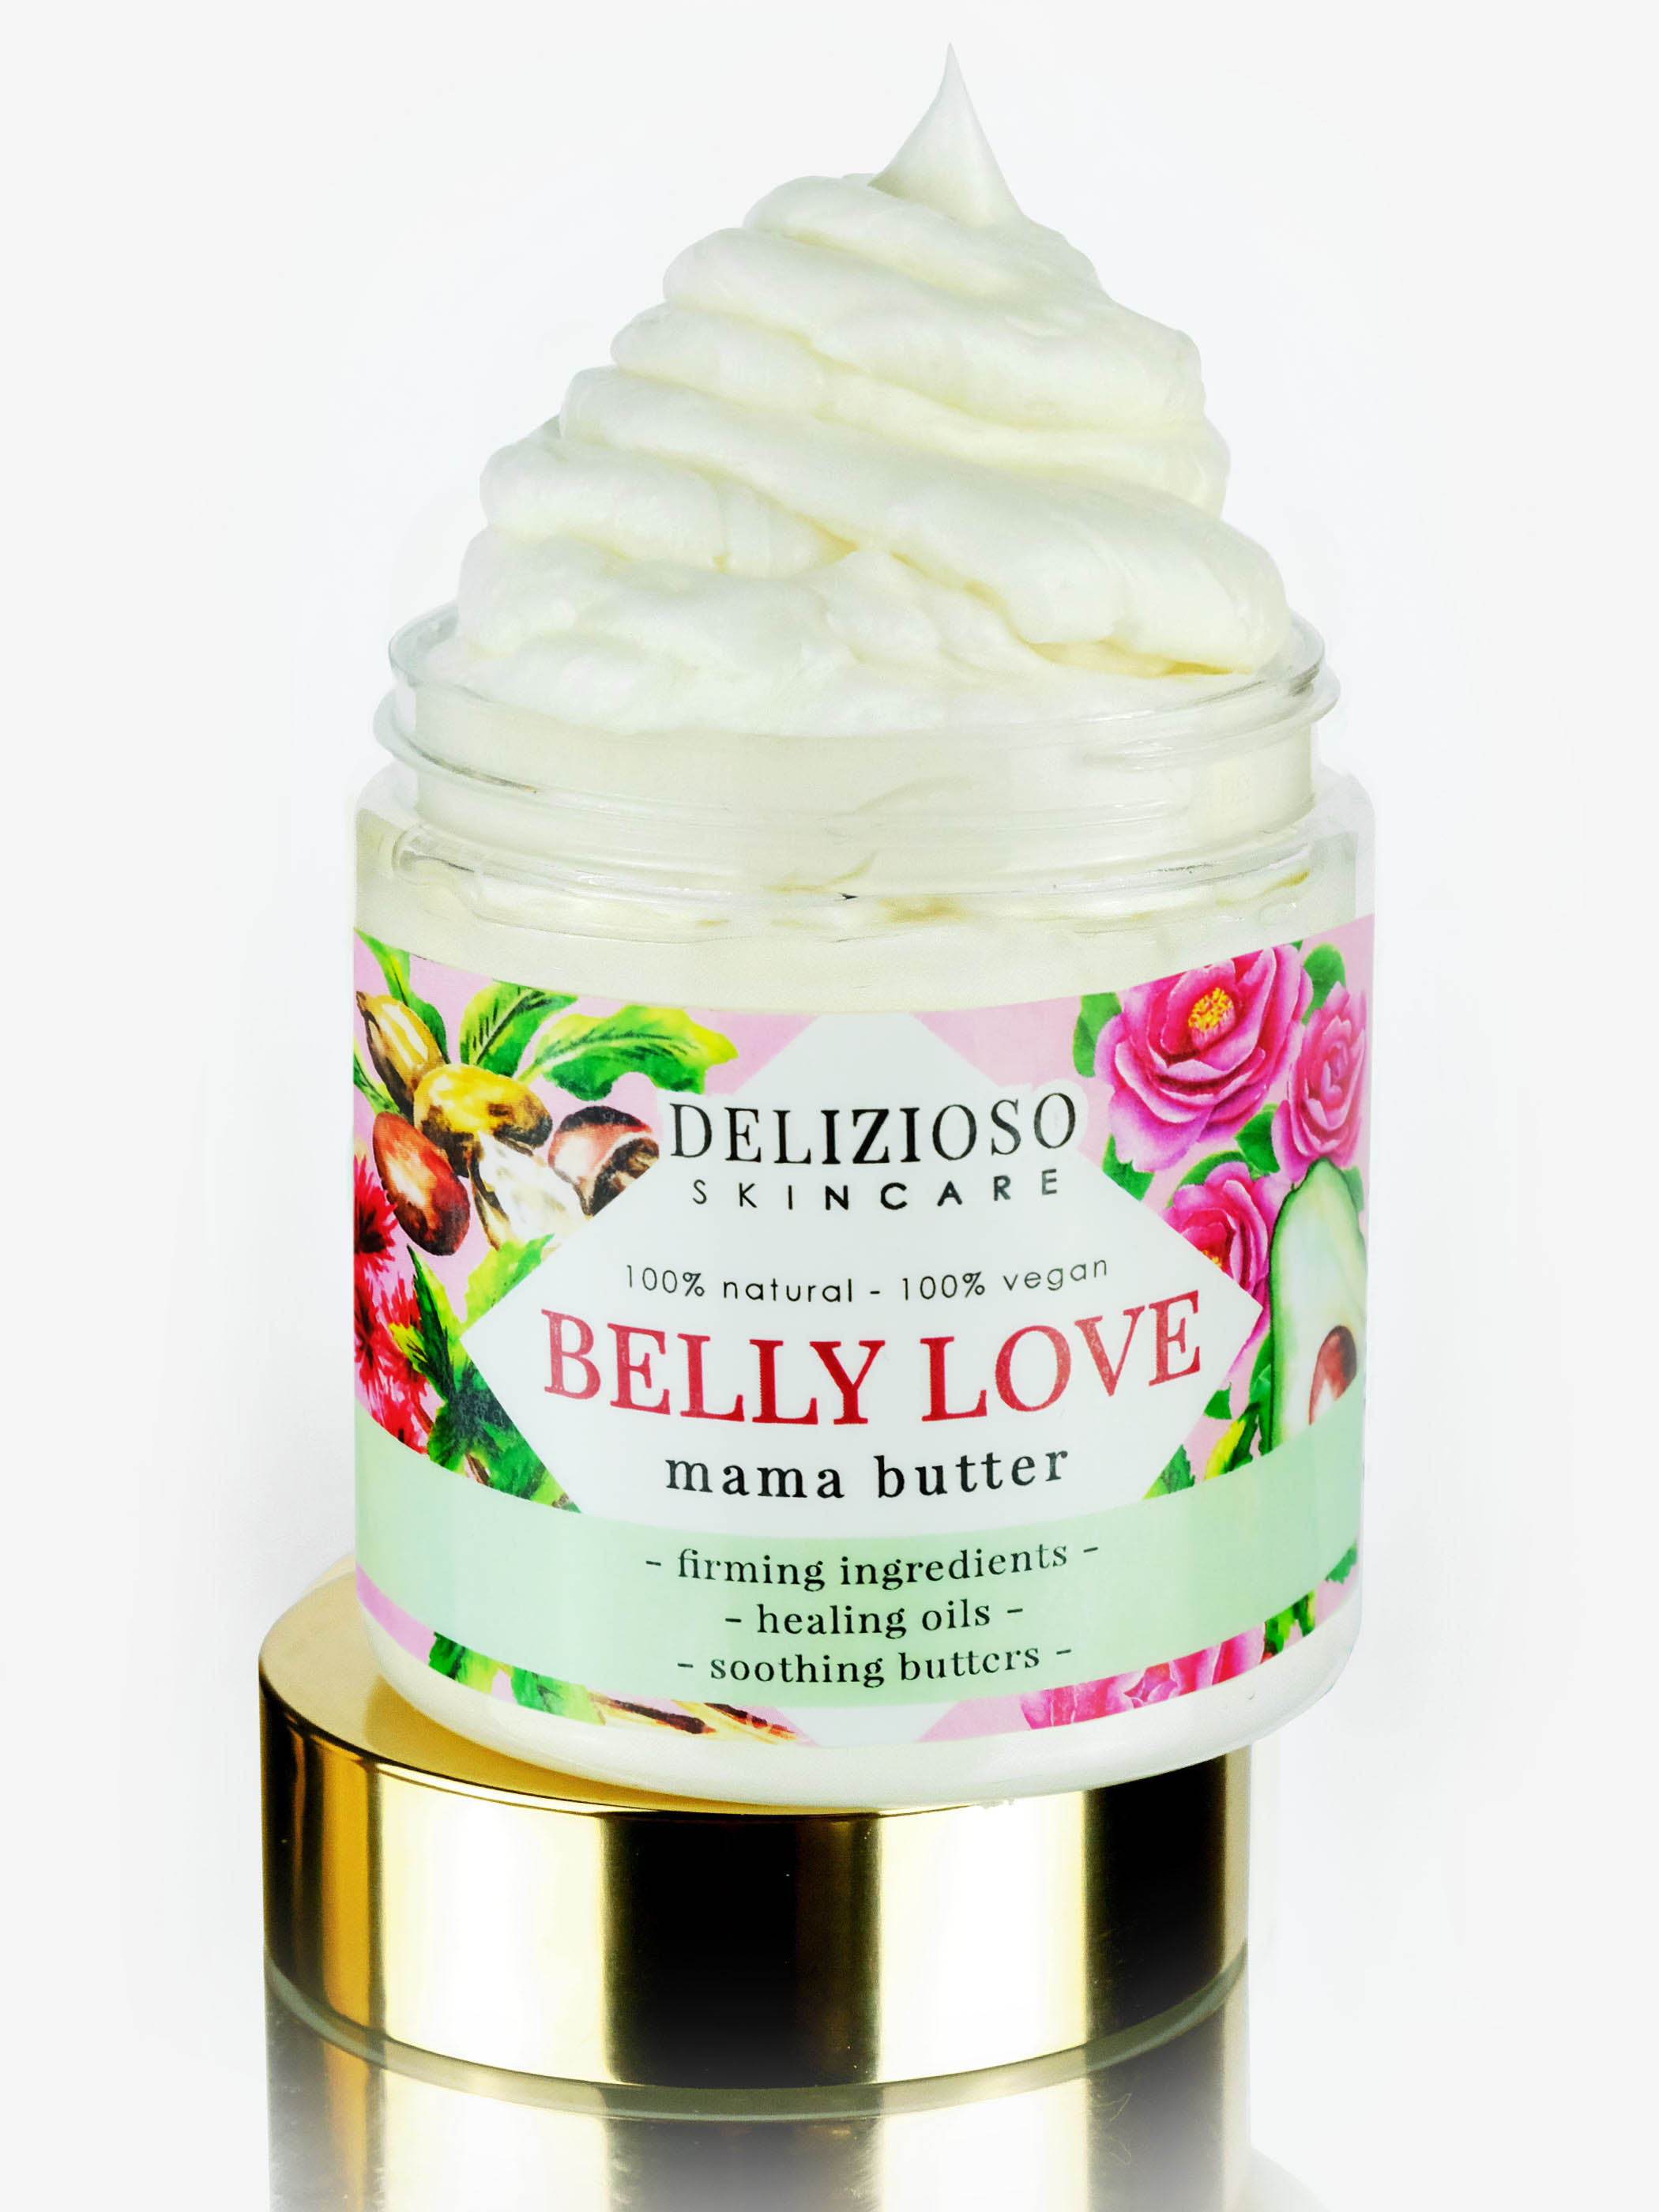 Belly Love Firming Mama Butter